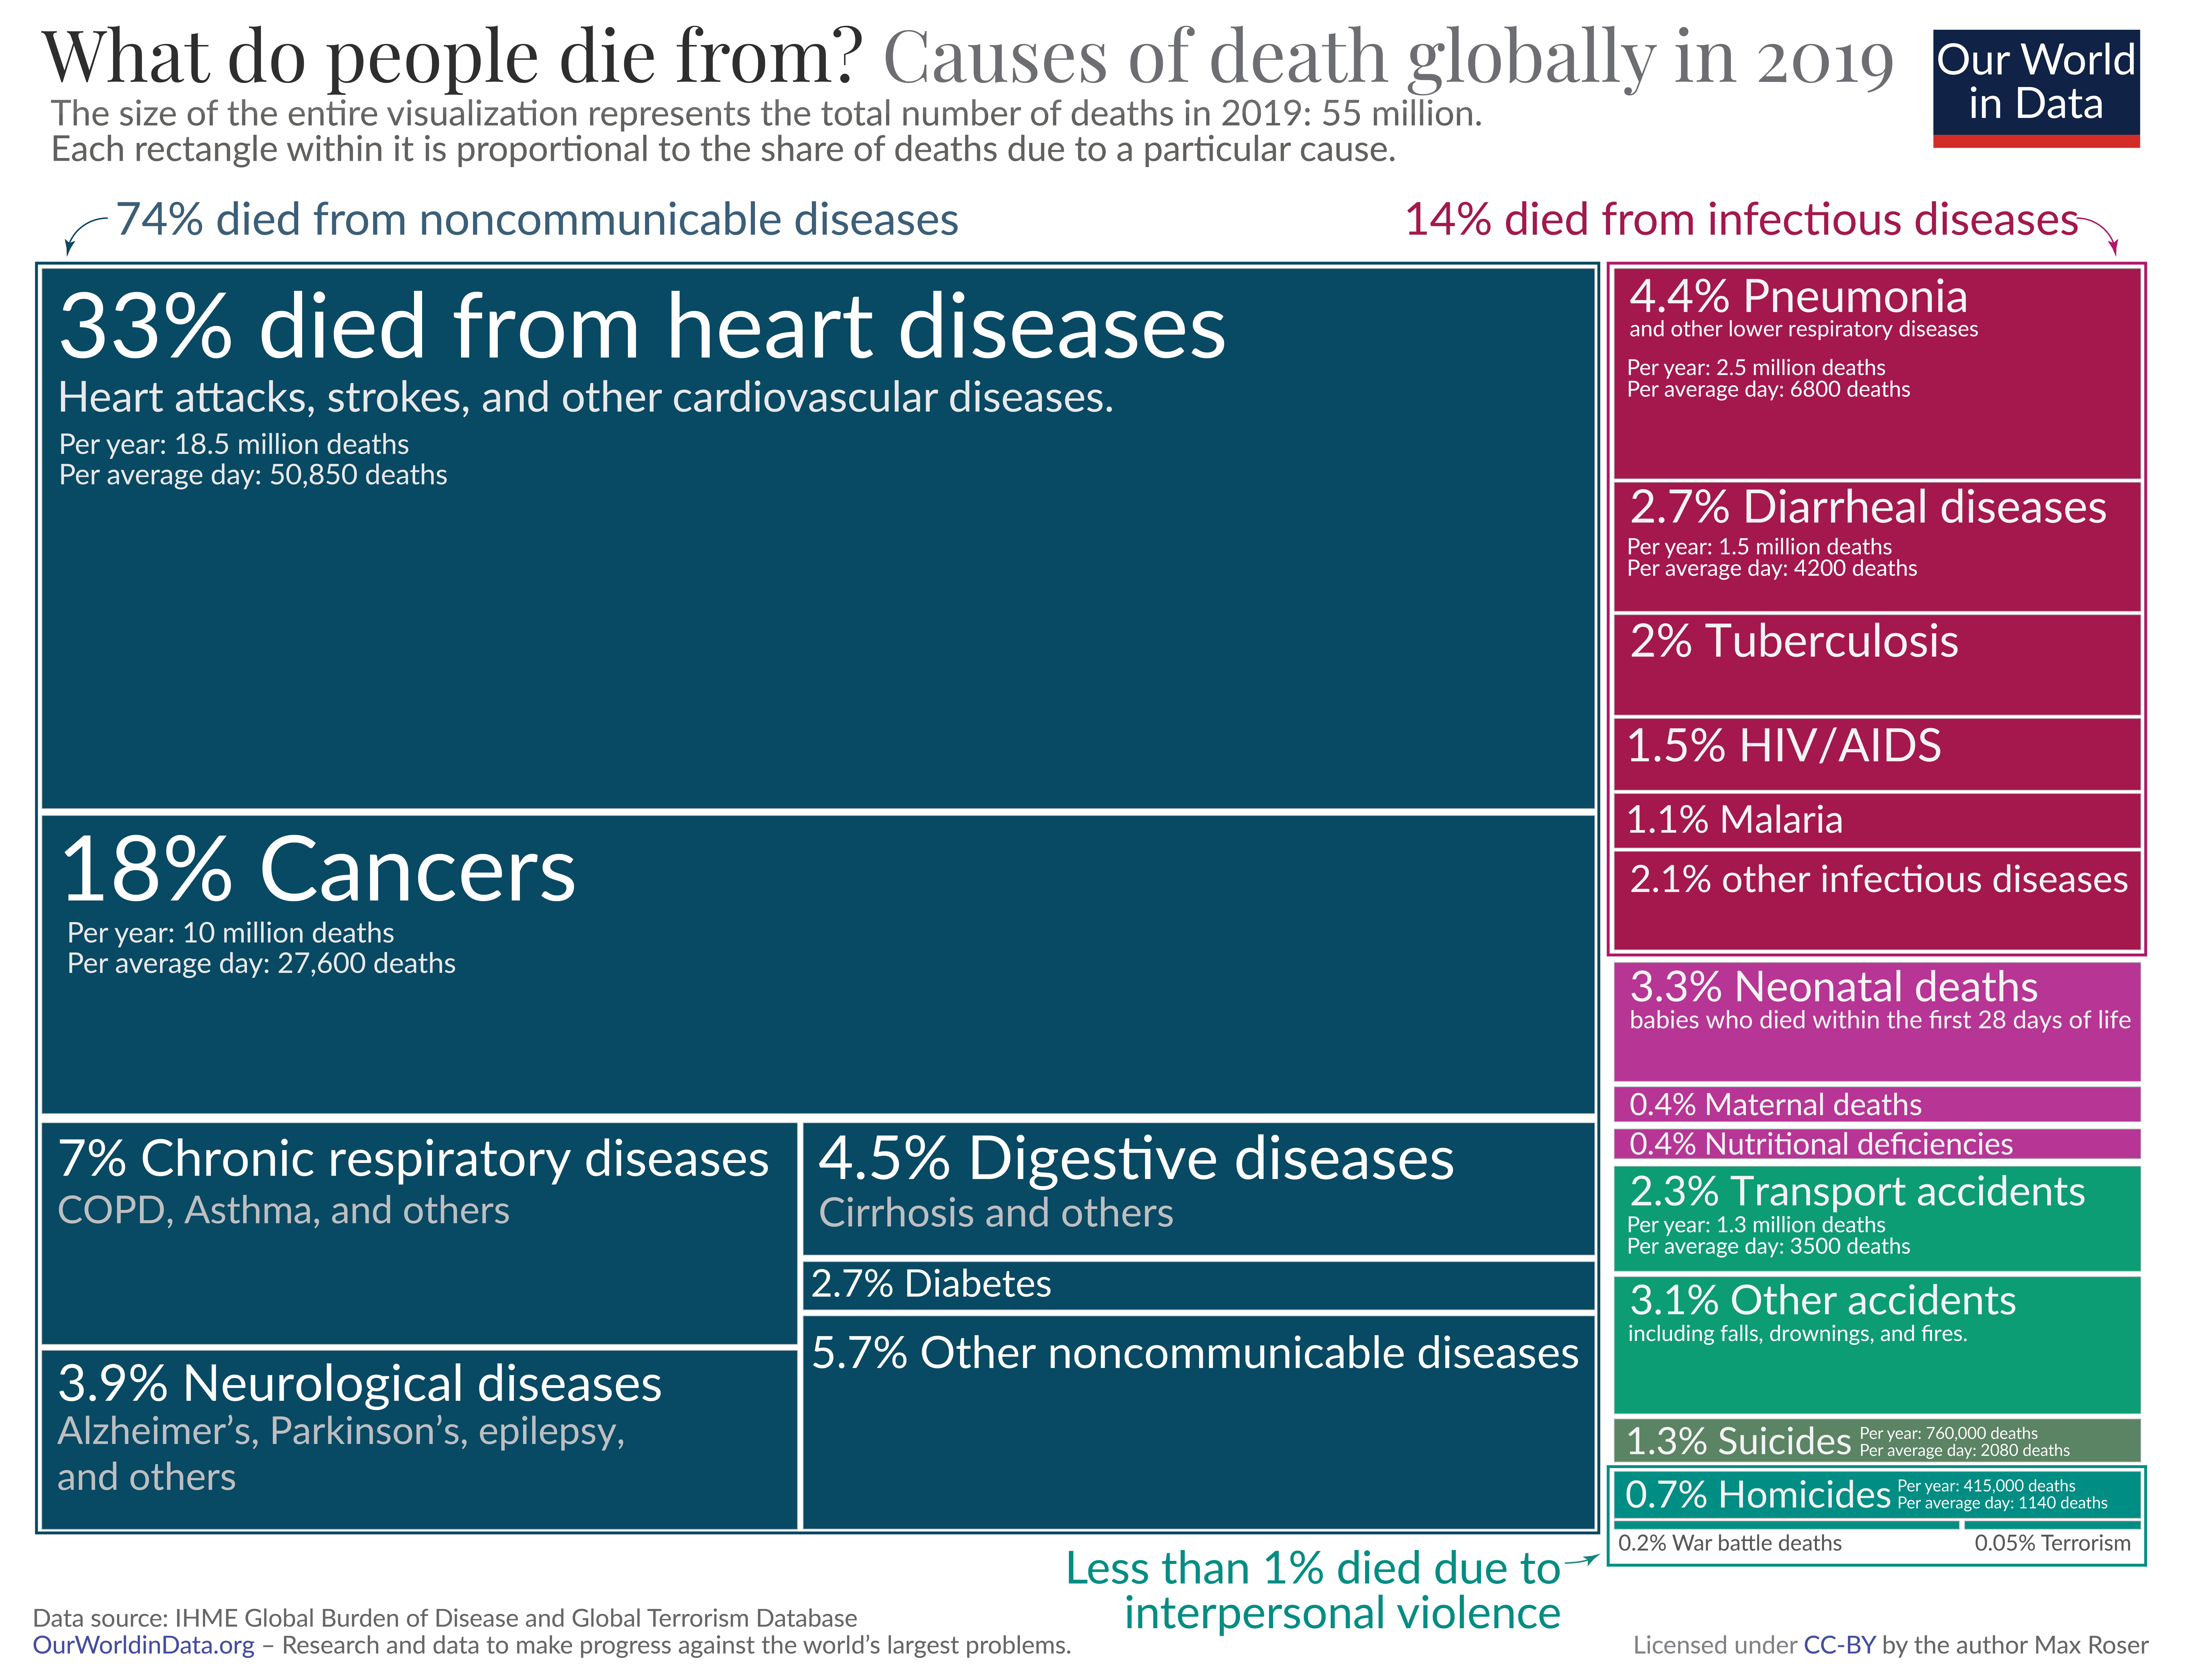 Tree map of causes of death globally in 2019, with non-communicable diseases in blue, communicable or infectious diseases in red, and injuries in green. The most common causes of deaths are non-communicable diseases such as heart diseases and cancers, while injuries and especially deaths from violence are rare.